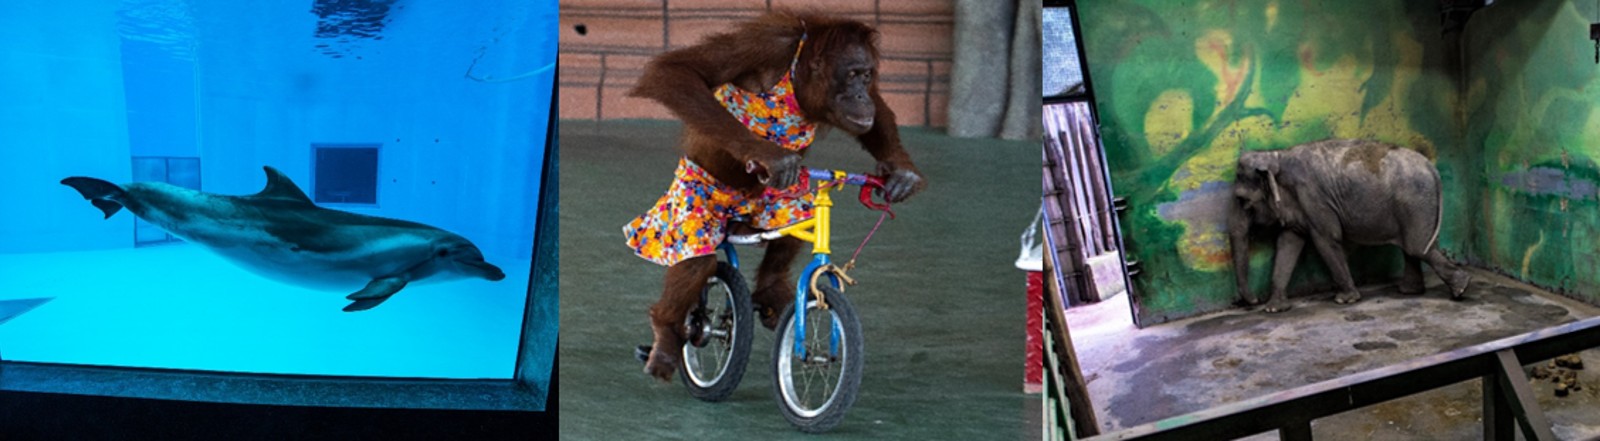 Three photos of captive animals. Left to right: A dolphin in a small tank; an orangutan wearing human clothes and riding a bike; a solitary elephant in a barren enclosure.